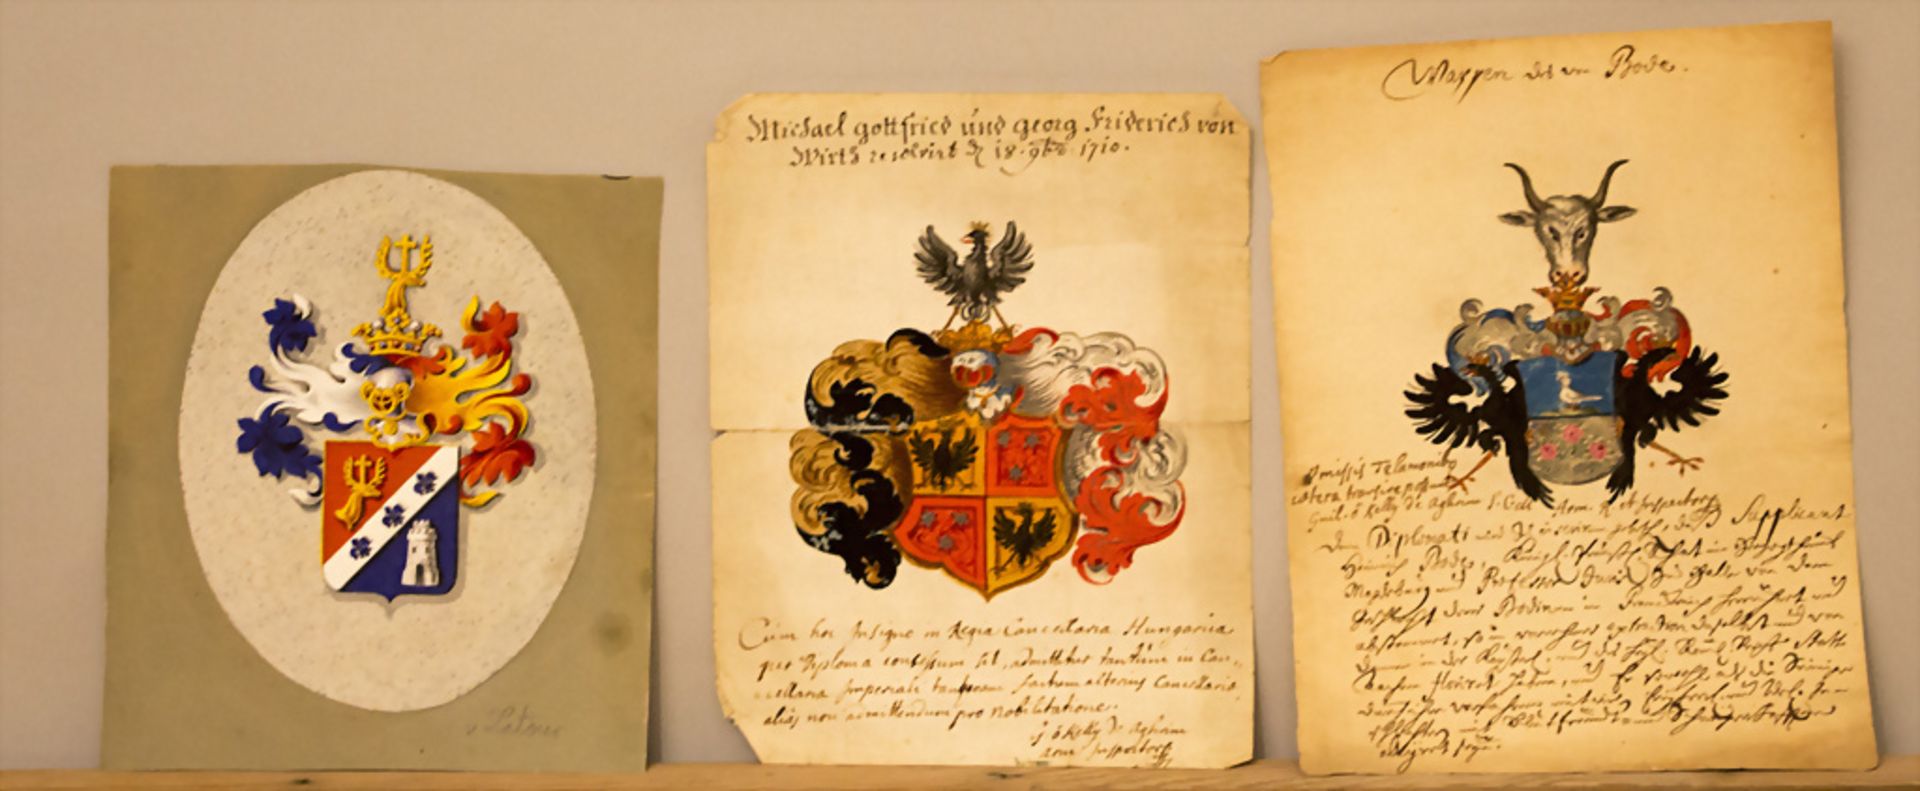 Konvolut feinste Wappenmalereien / A collection of very fine coat of arms drawings